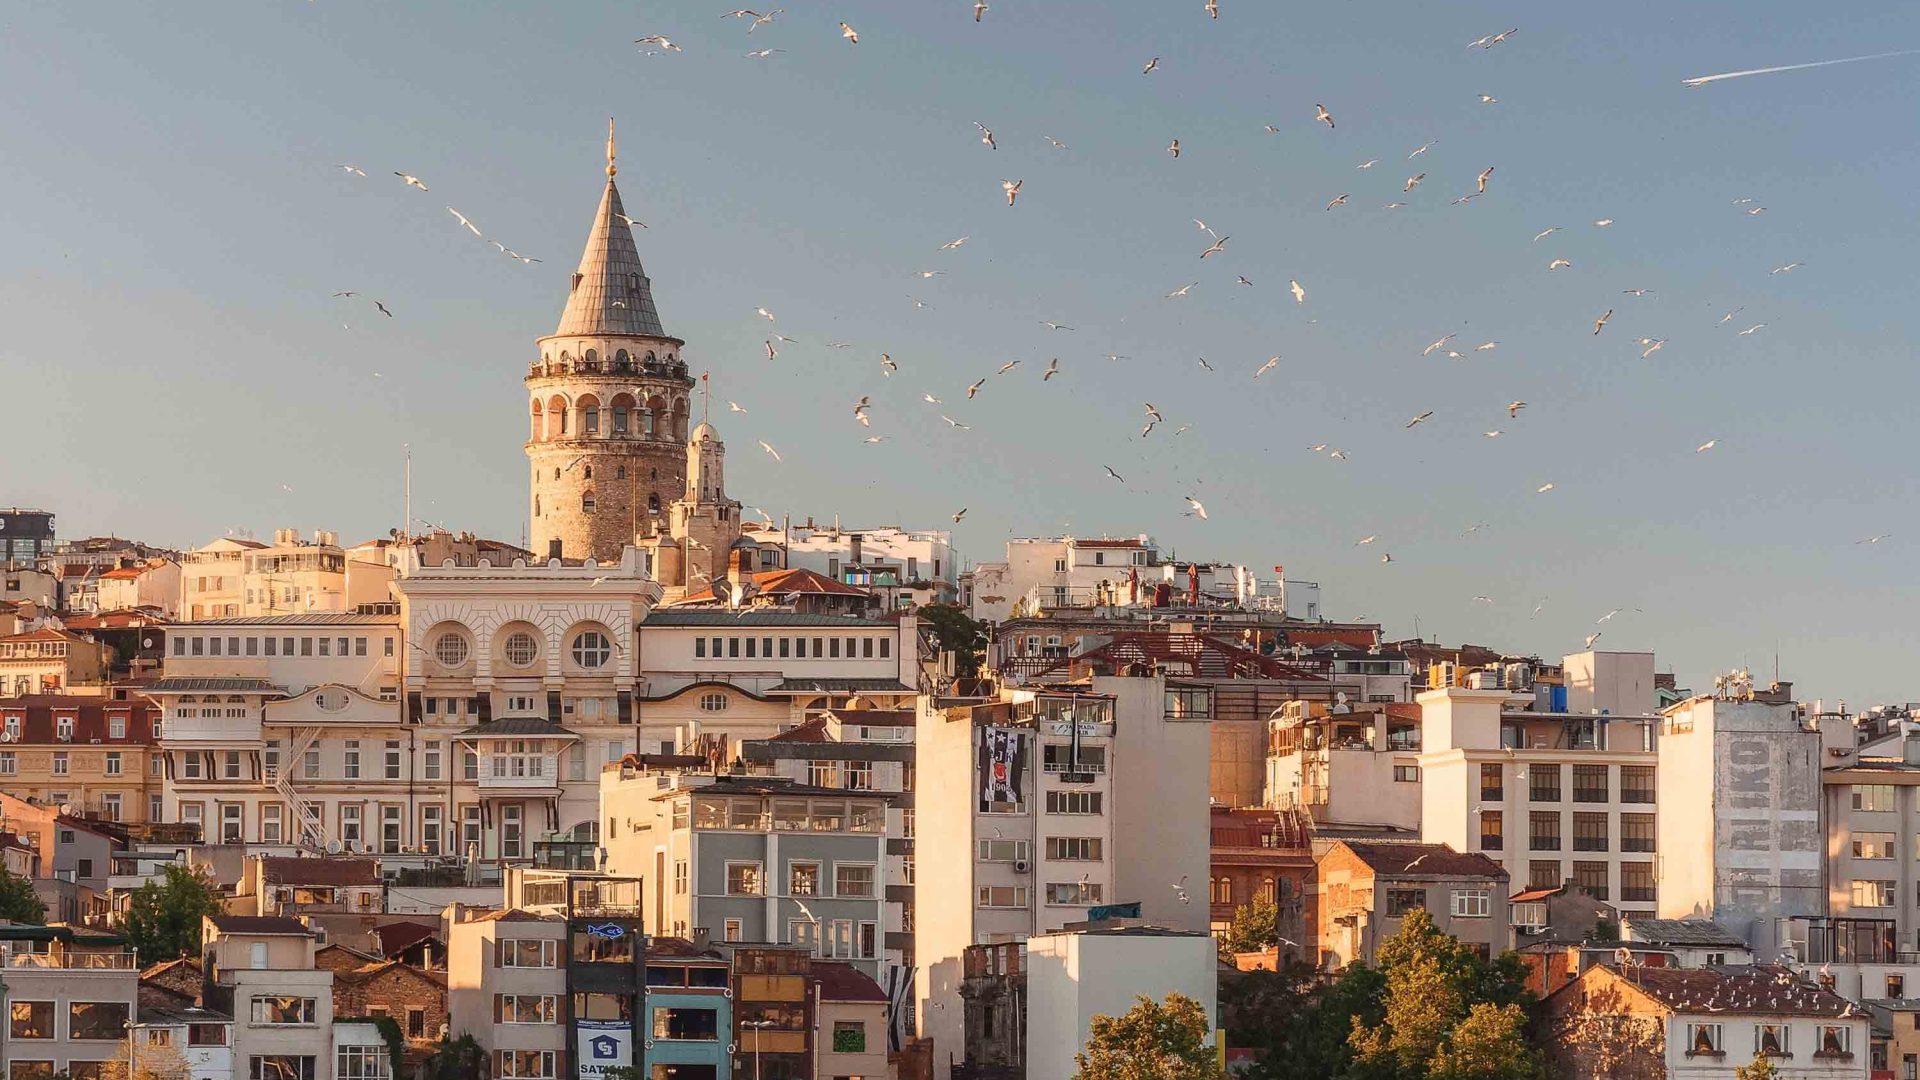 Birds fly over the buildings of Istanbul.